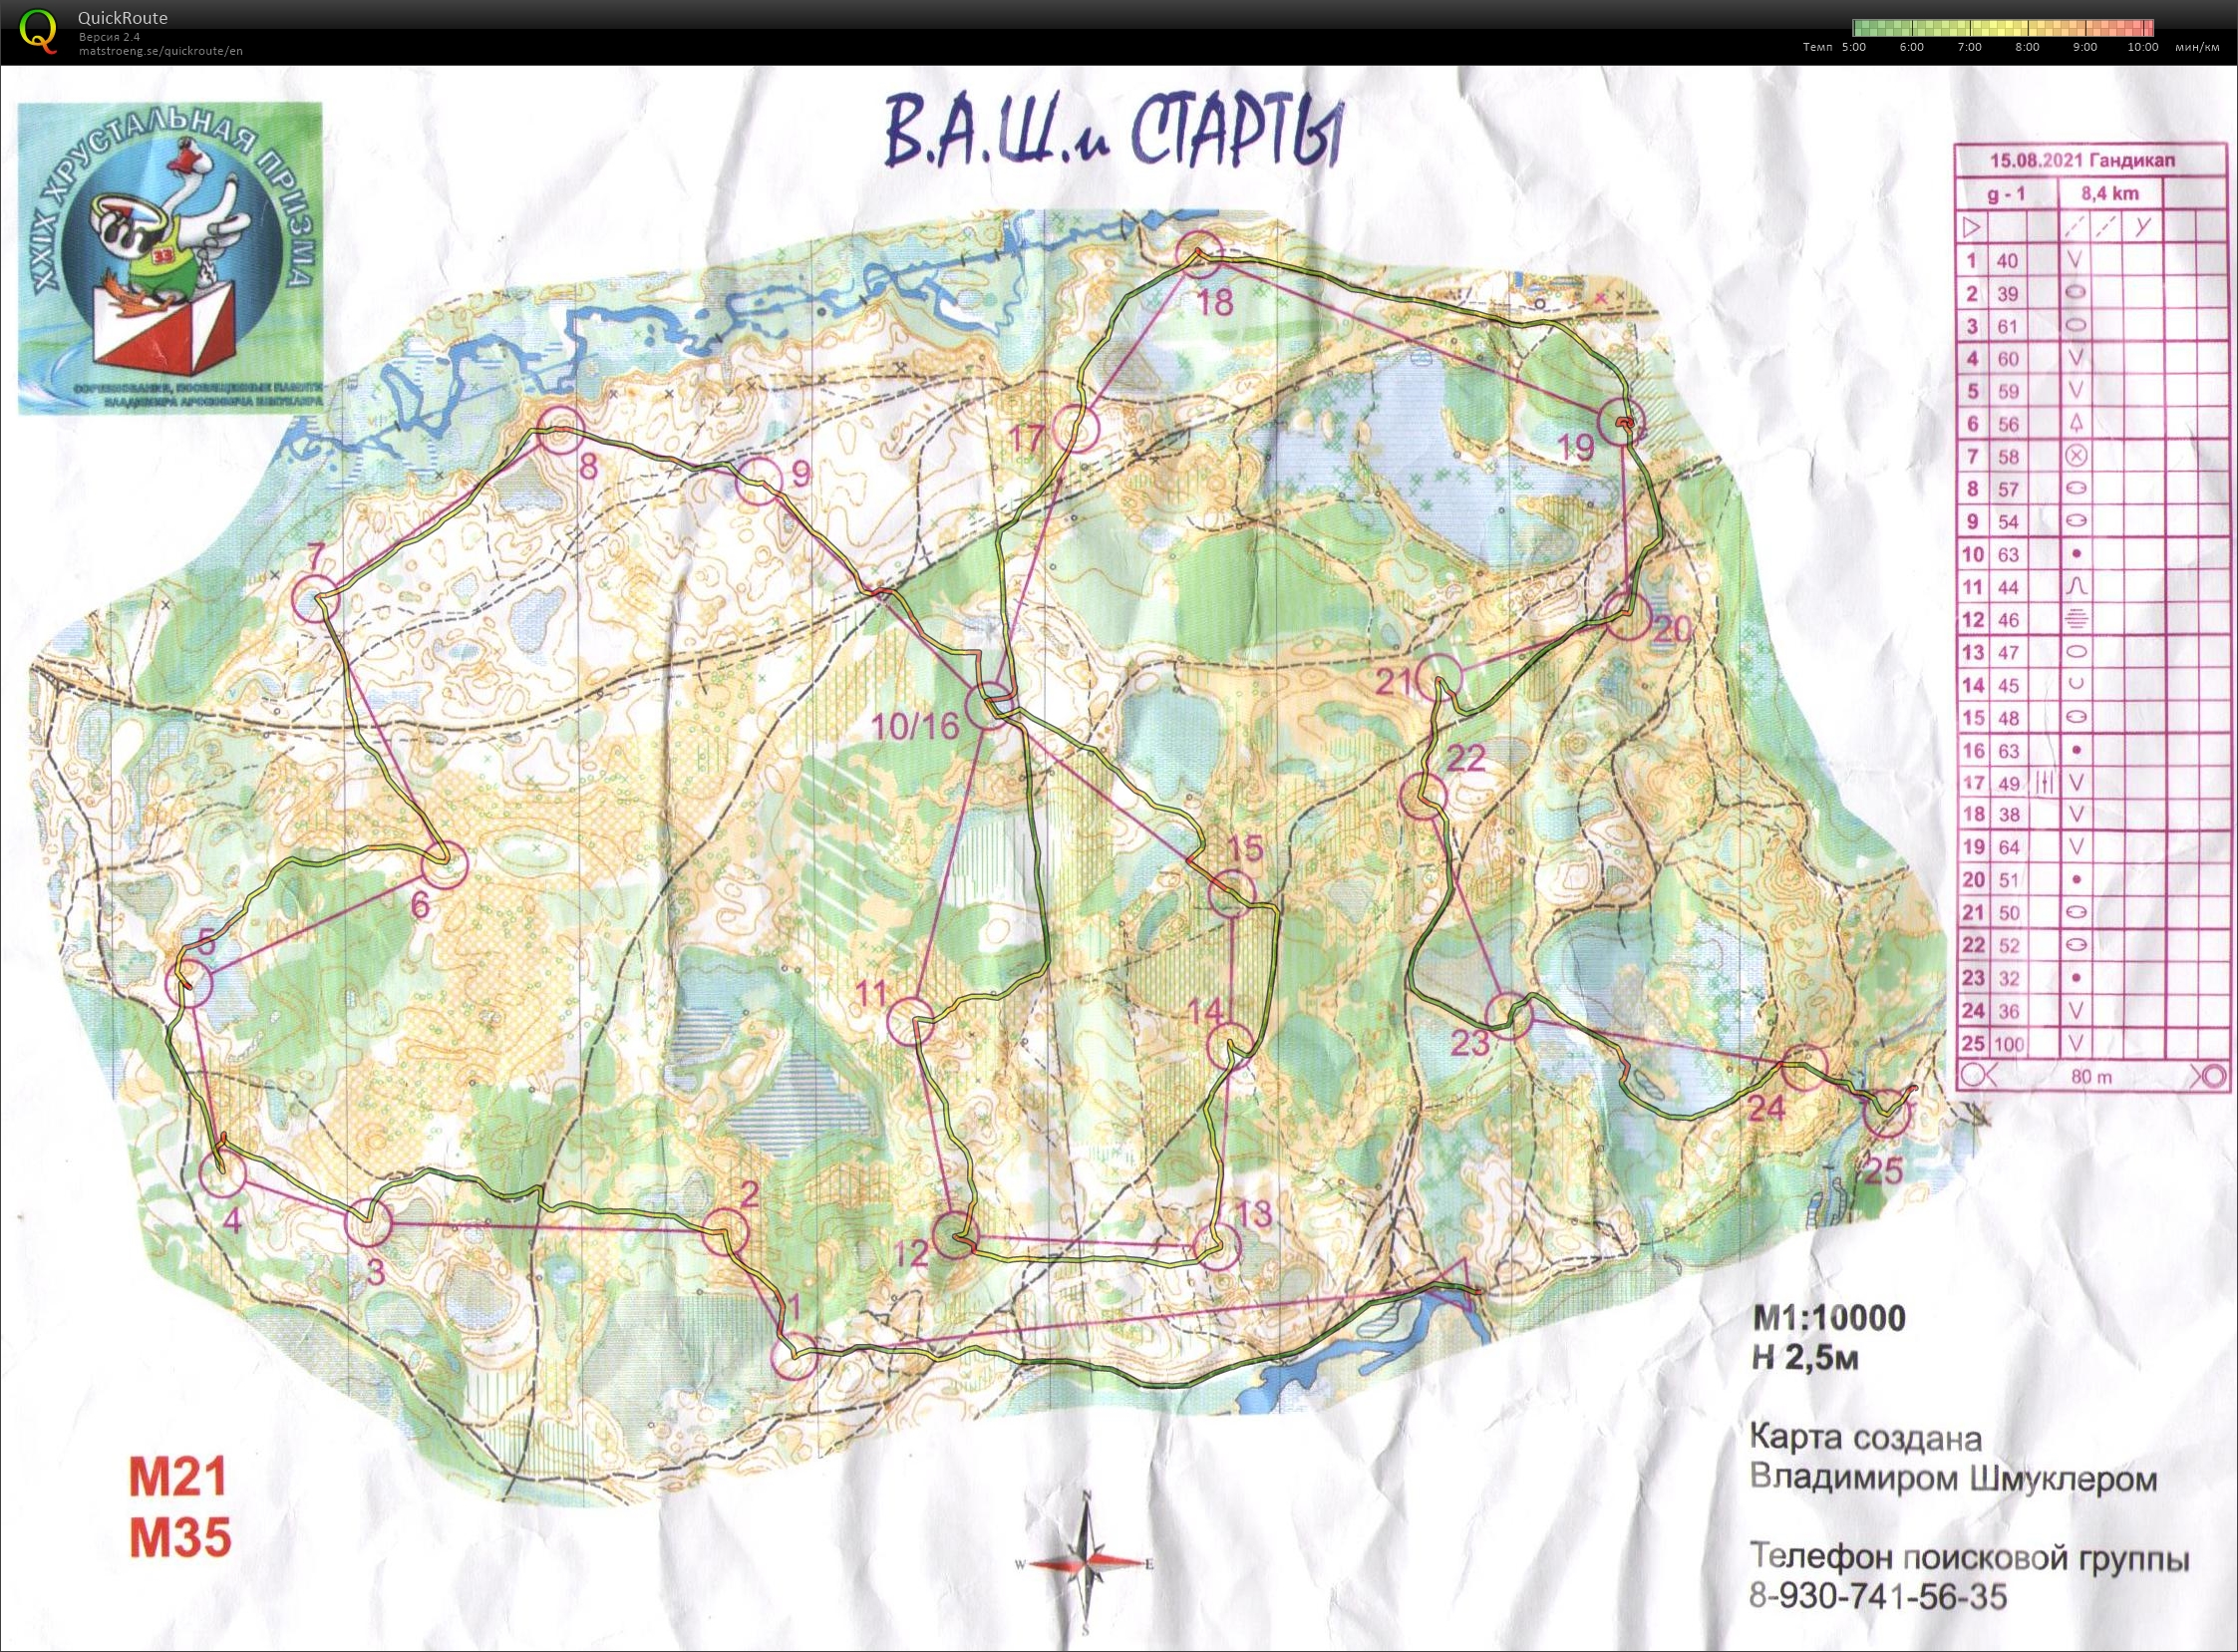 Map with track - Хрустальная призма 2021 (гандикап), area - Окатово, from orienteering map archive of Глеб Грибанов